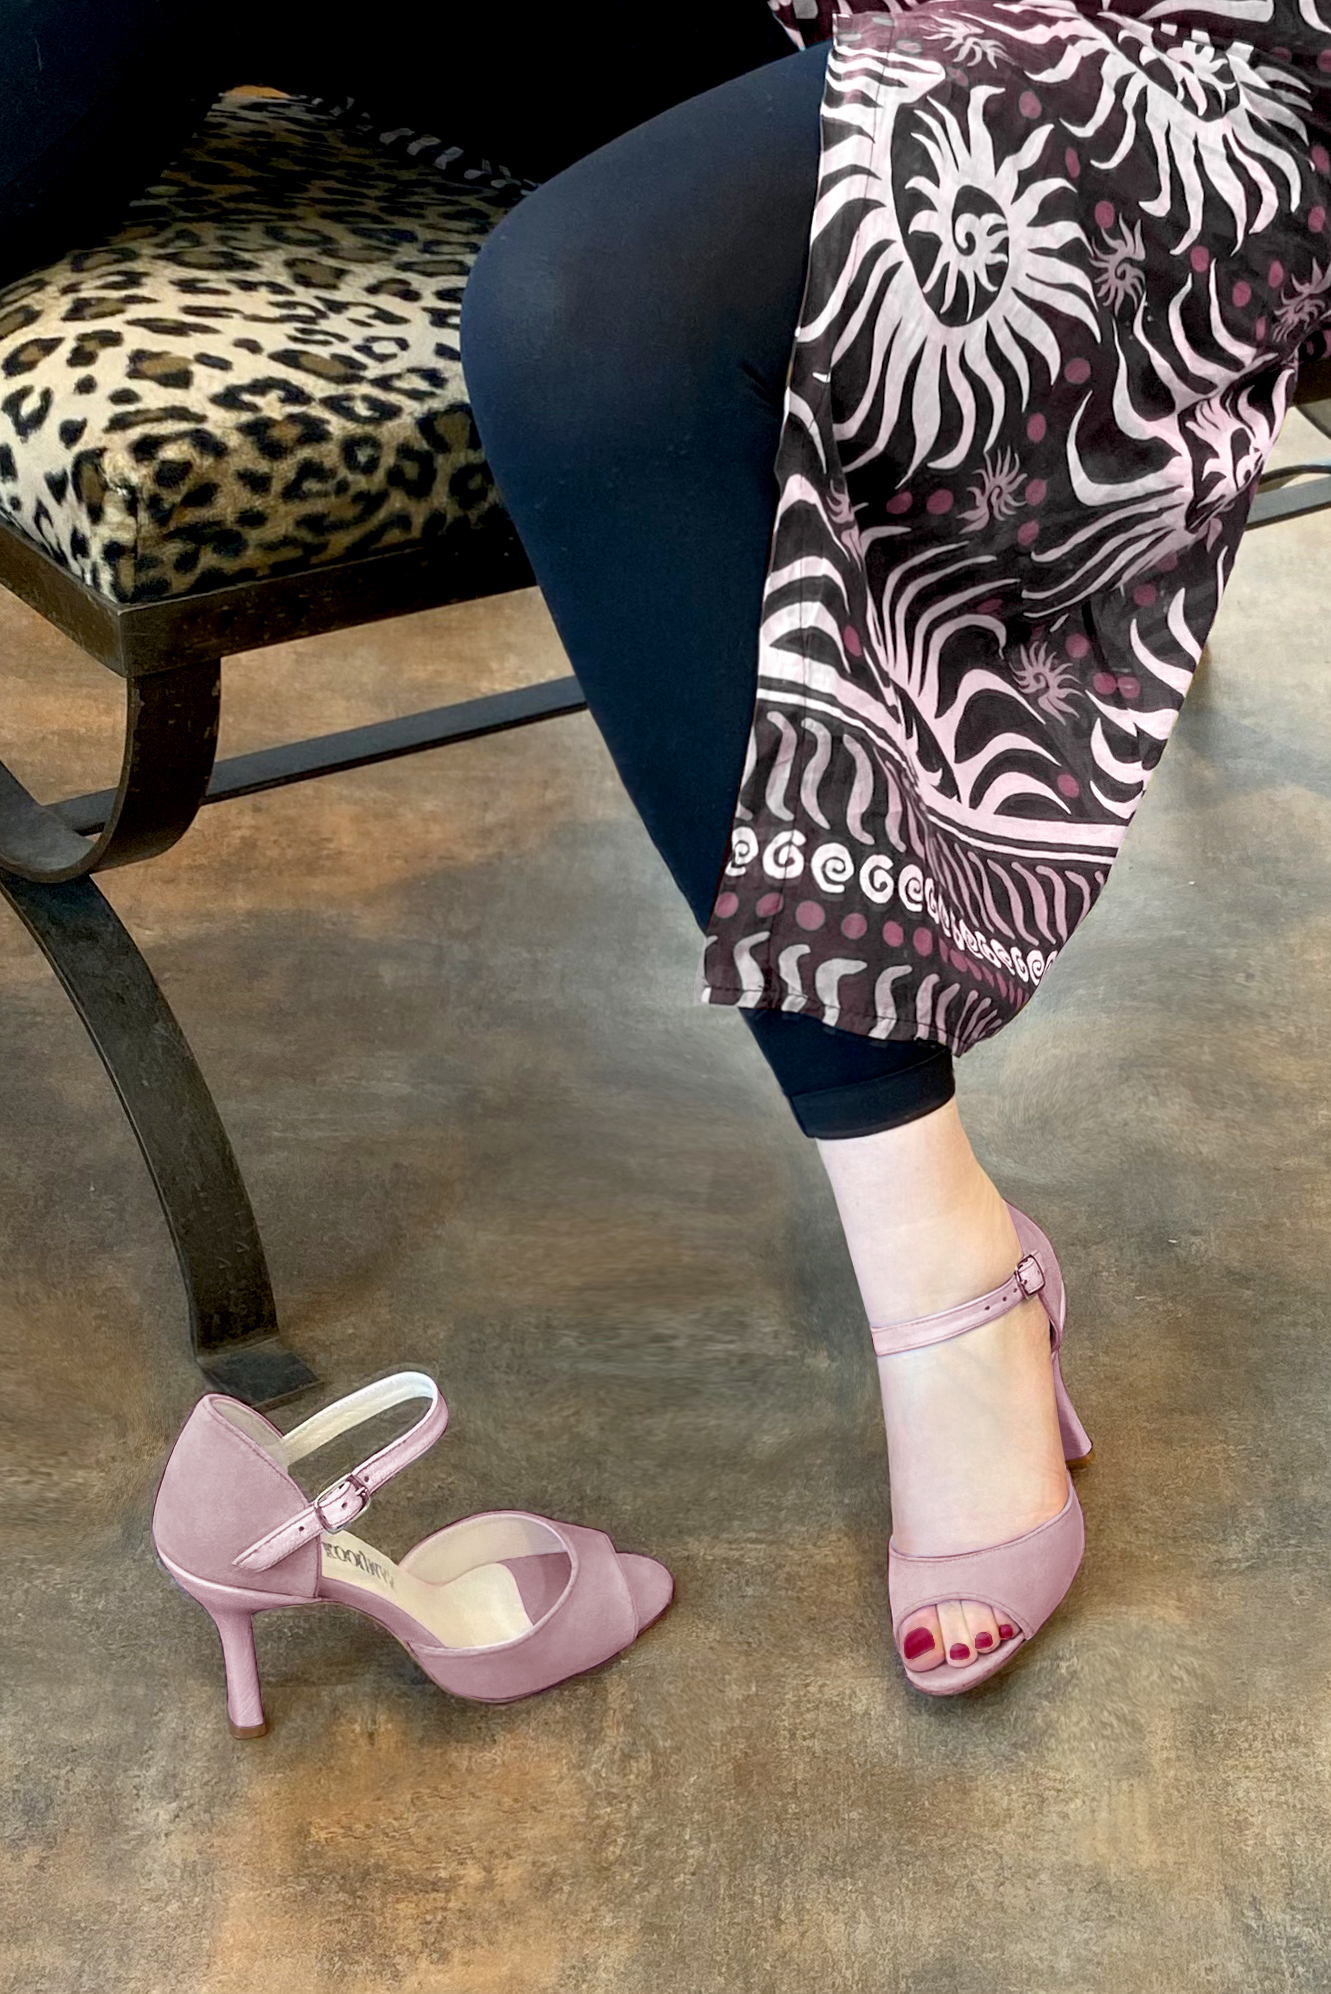 Dusty rose pink matching sandals and clutch. Worn view - Florence KOOIJMAN